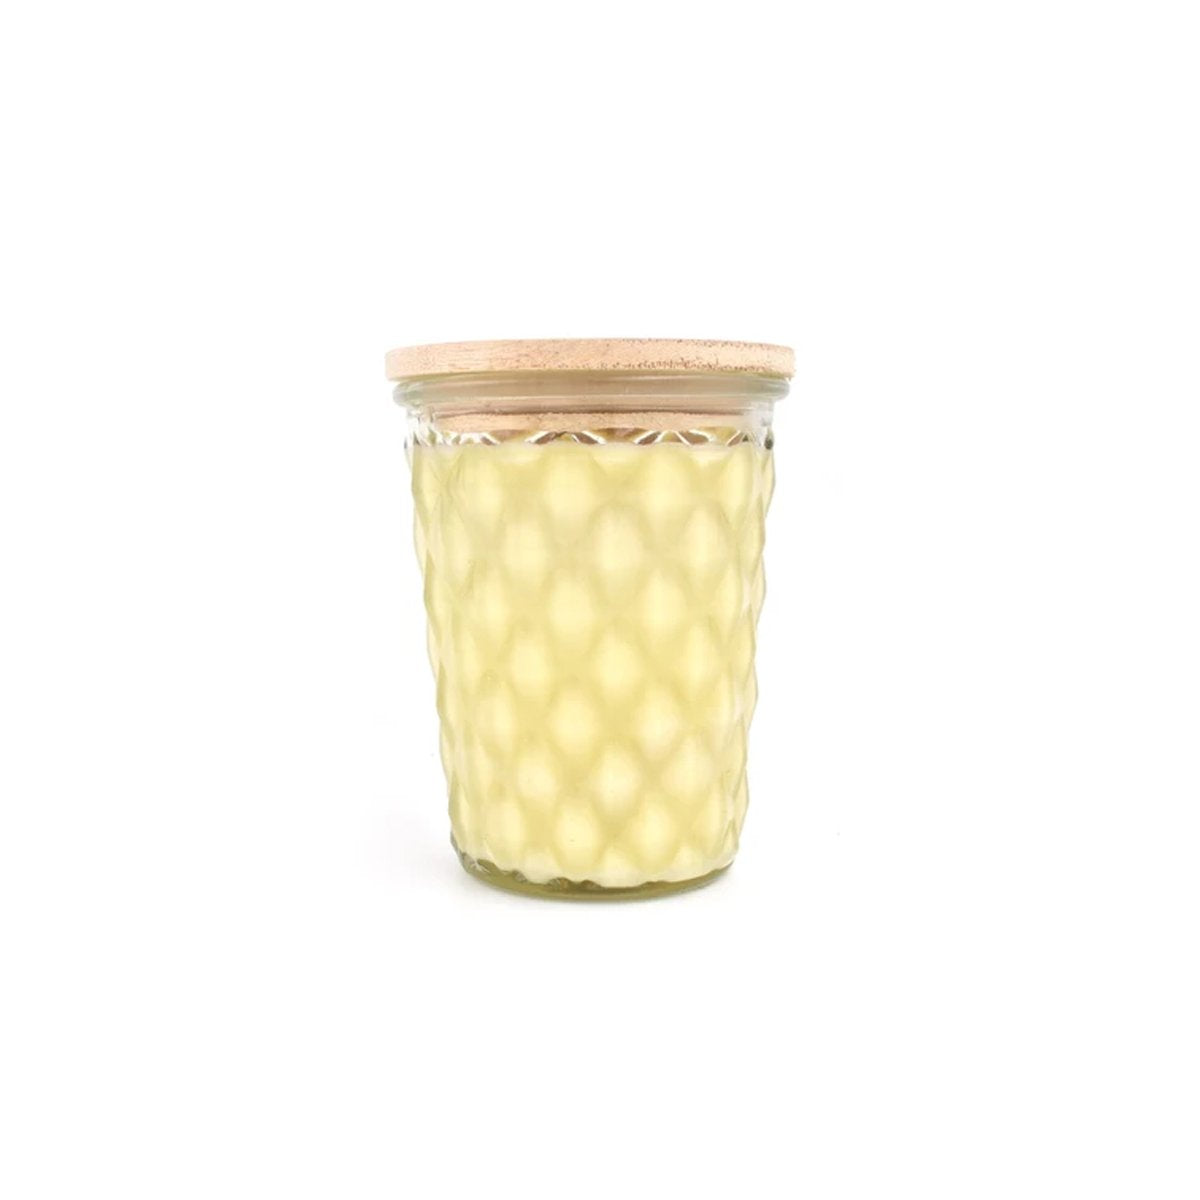 Whipped Almond Frosting Timeless Collection Jar Candle - Smockingbird's